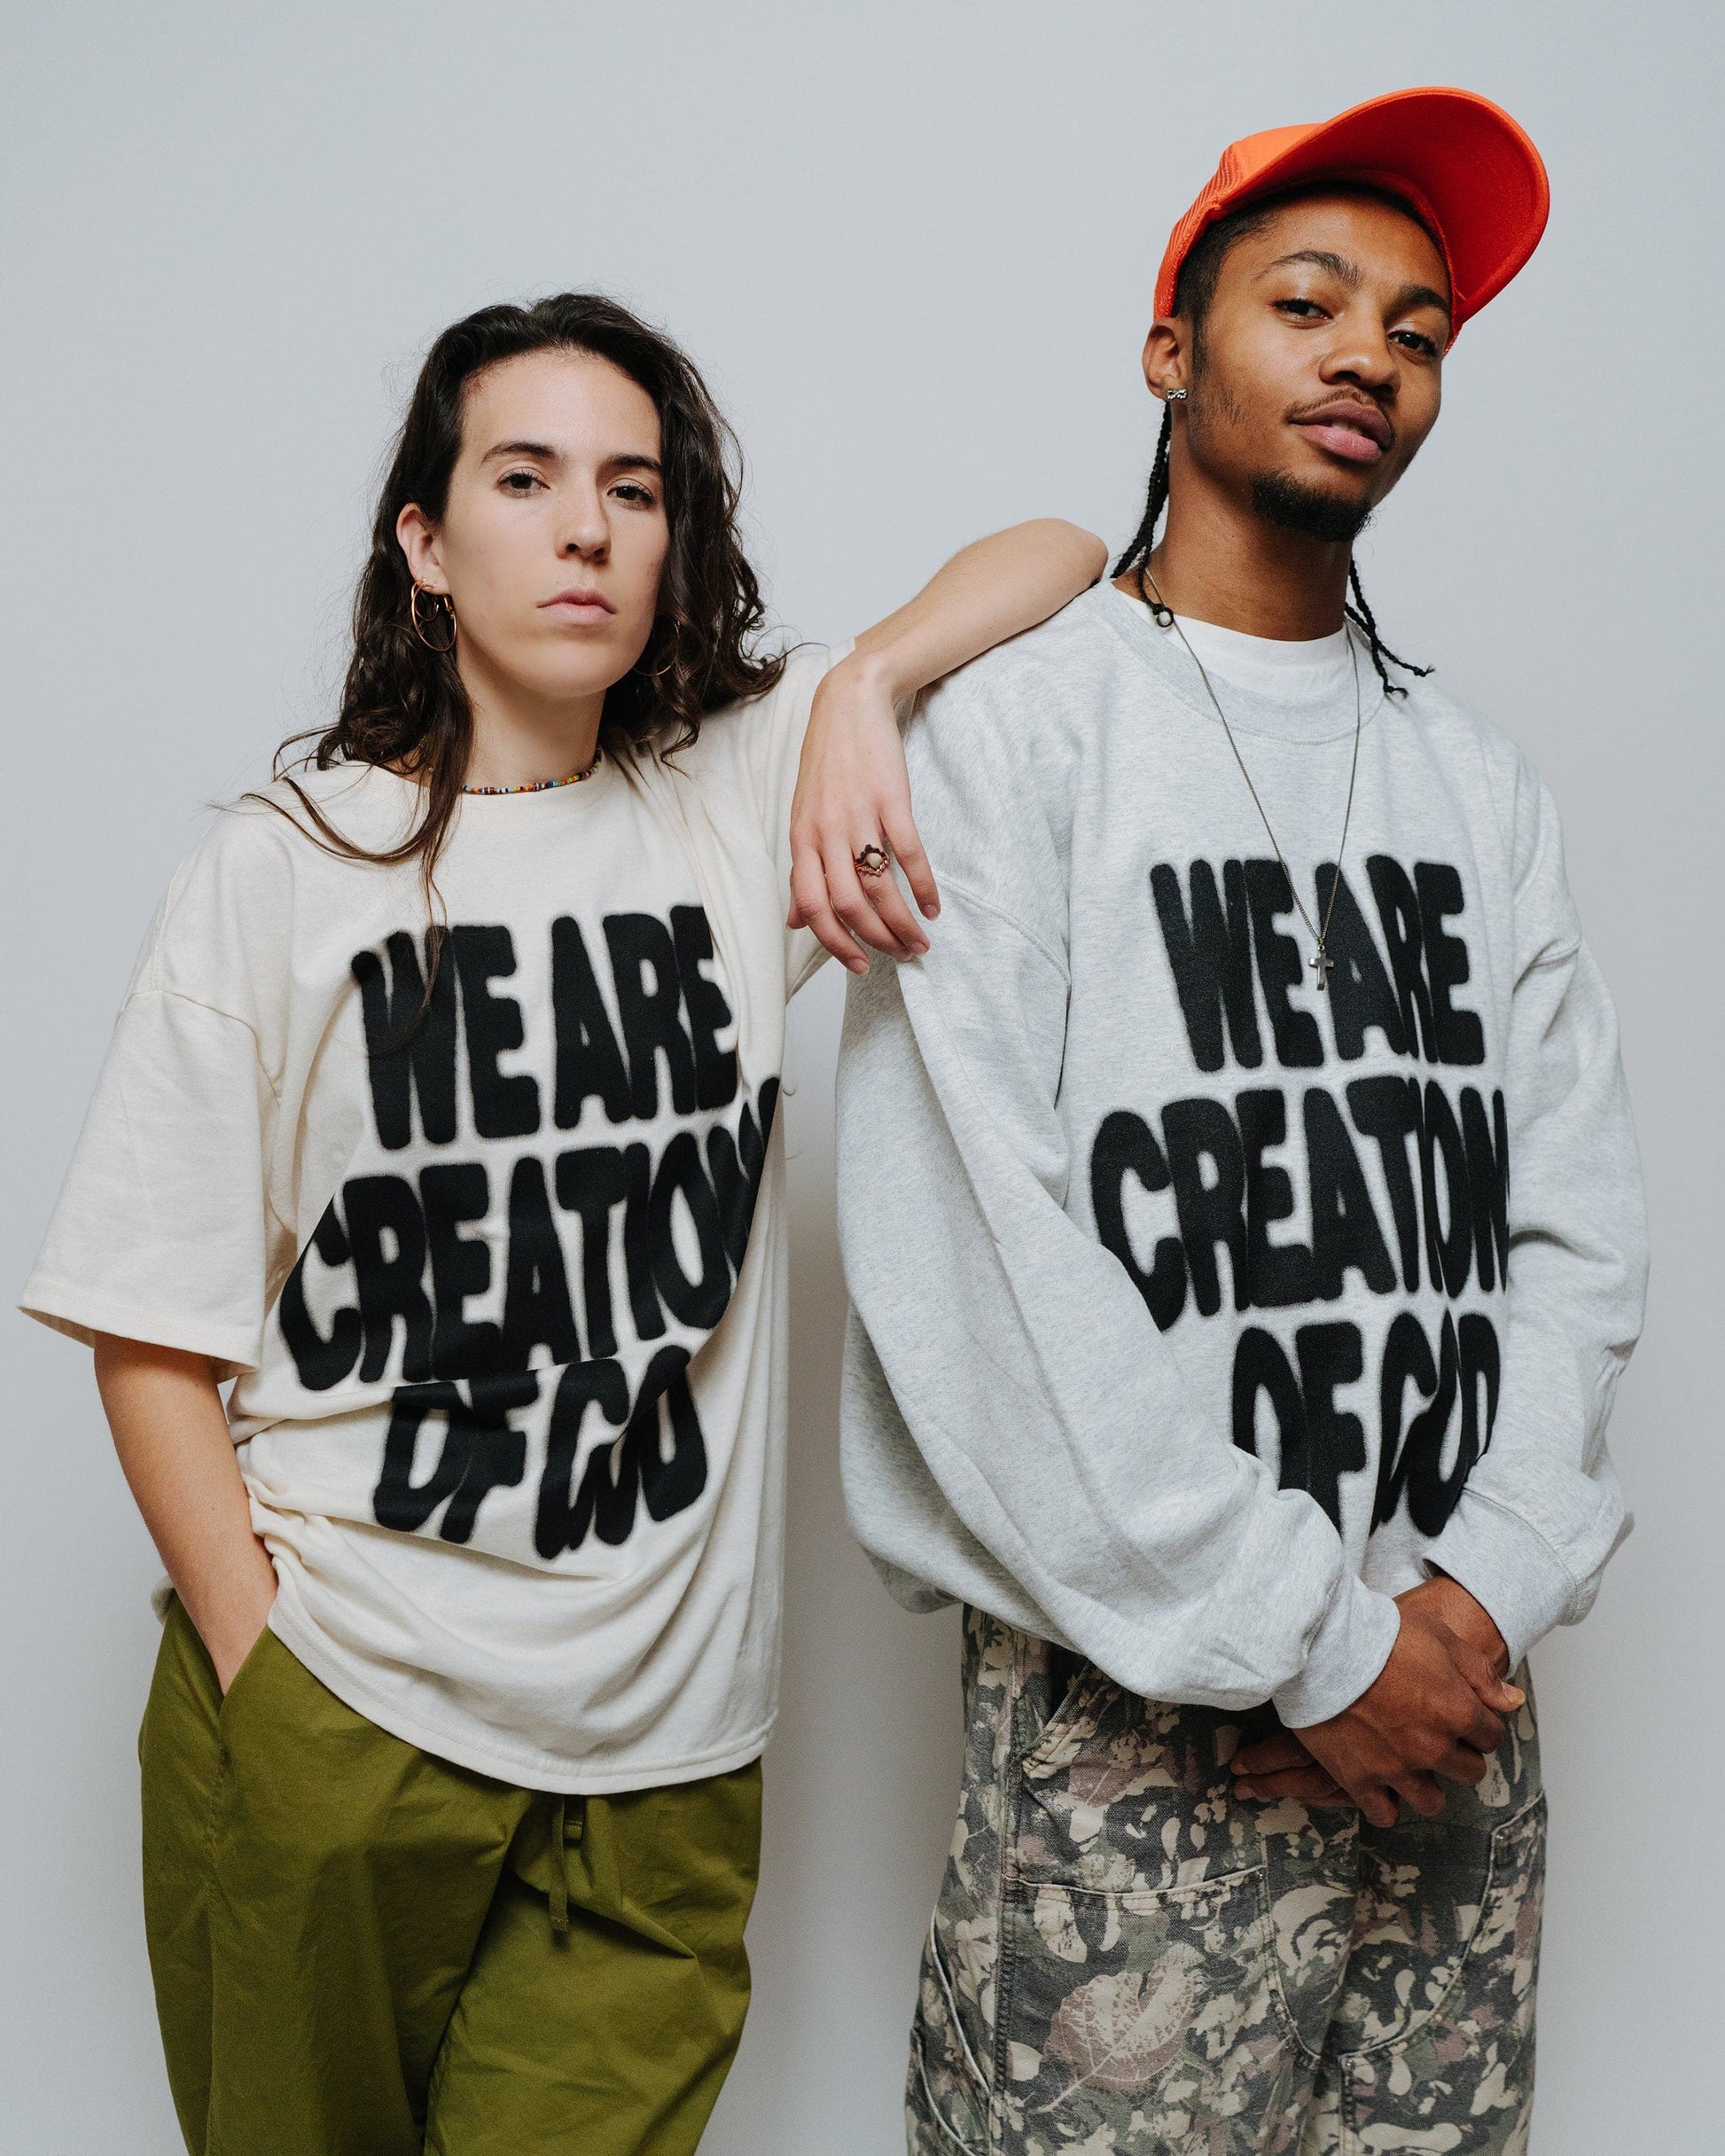 WE ARE CREATIONS OF GOD ash crewneck sweatshirt, orange hat, and natural tee by NHIM Apparel Christian clothing brand